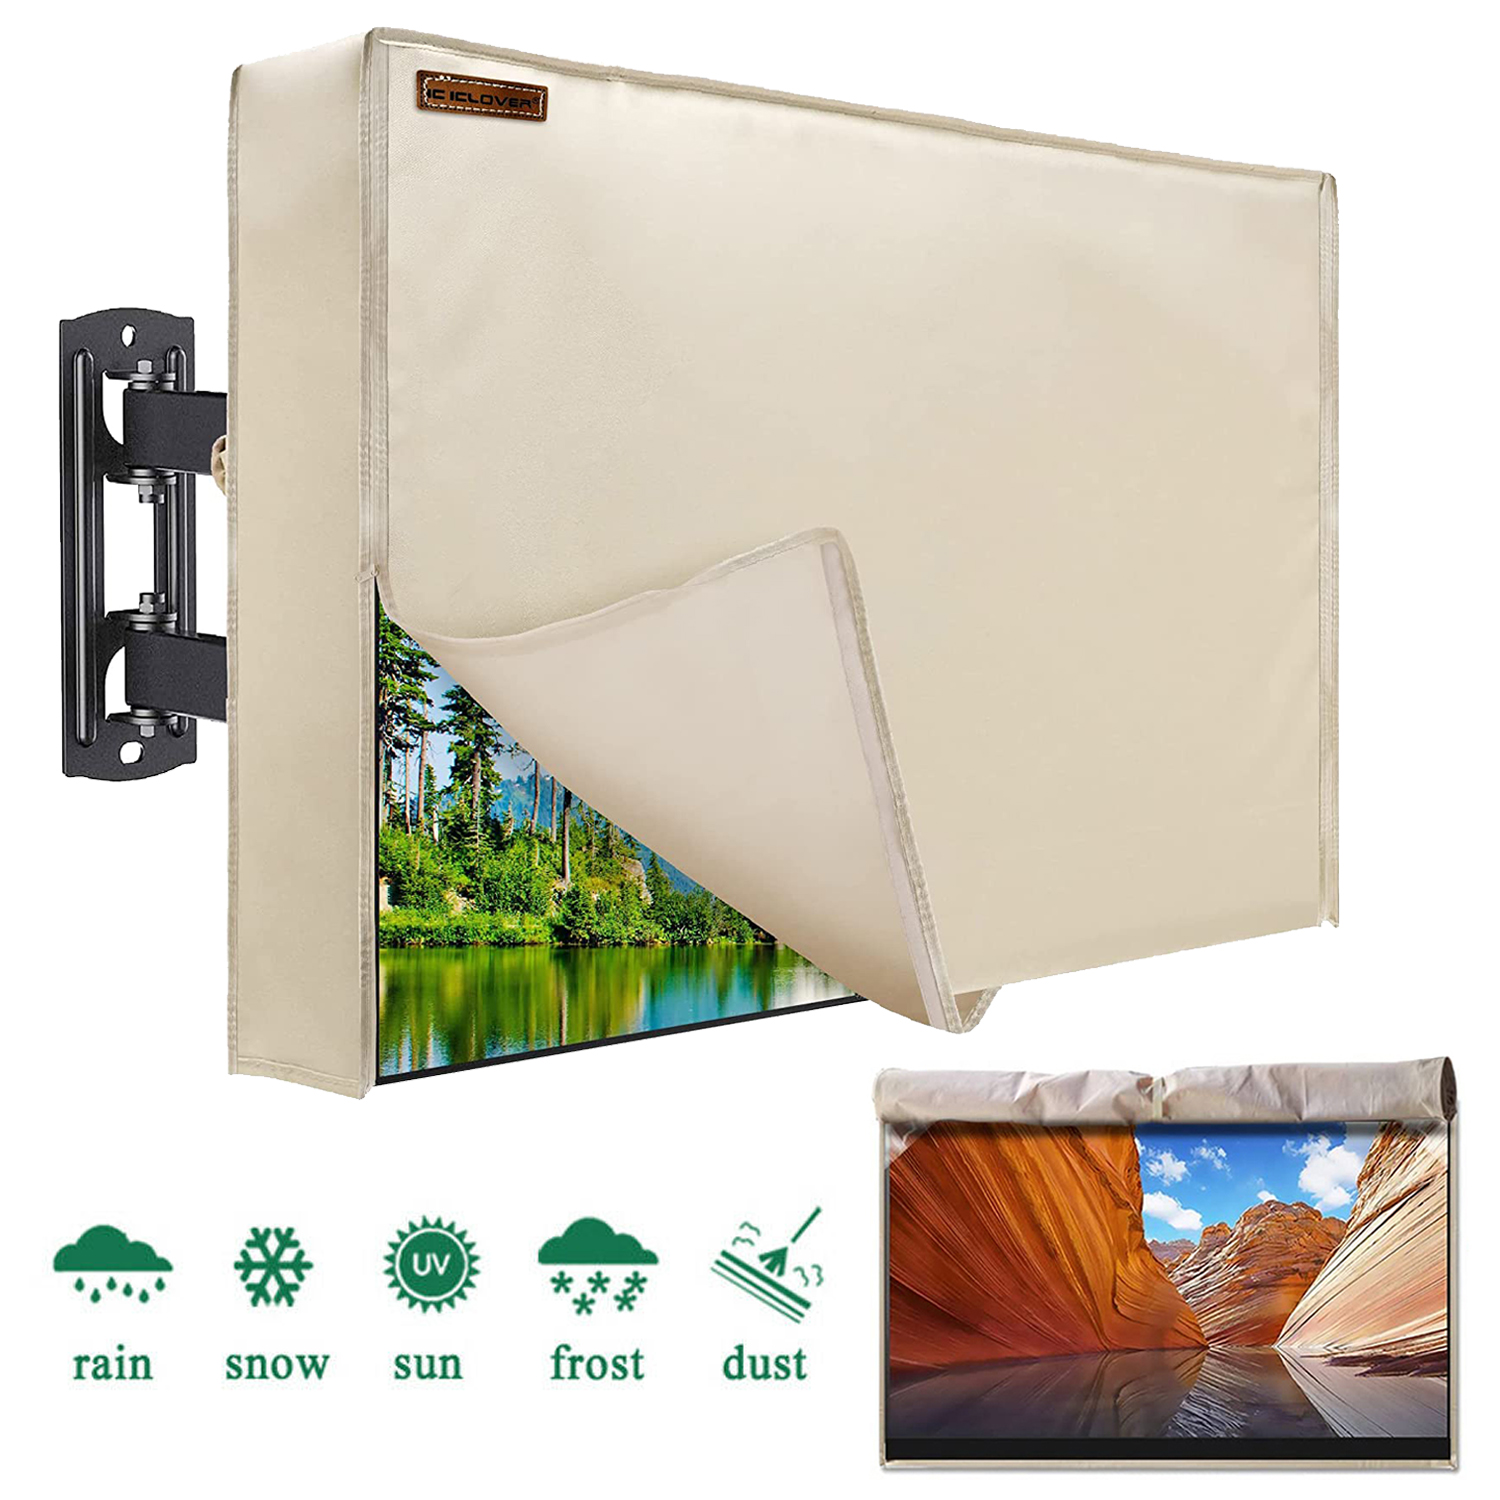 IC ICLOVER 60"-65" Outdoor Weatherproof LCD Plasma TV/Television Cover Flat Screen TV/Television Dustproof Protector with Waterproof Remote Pocket, Beige - image 1 of 9